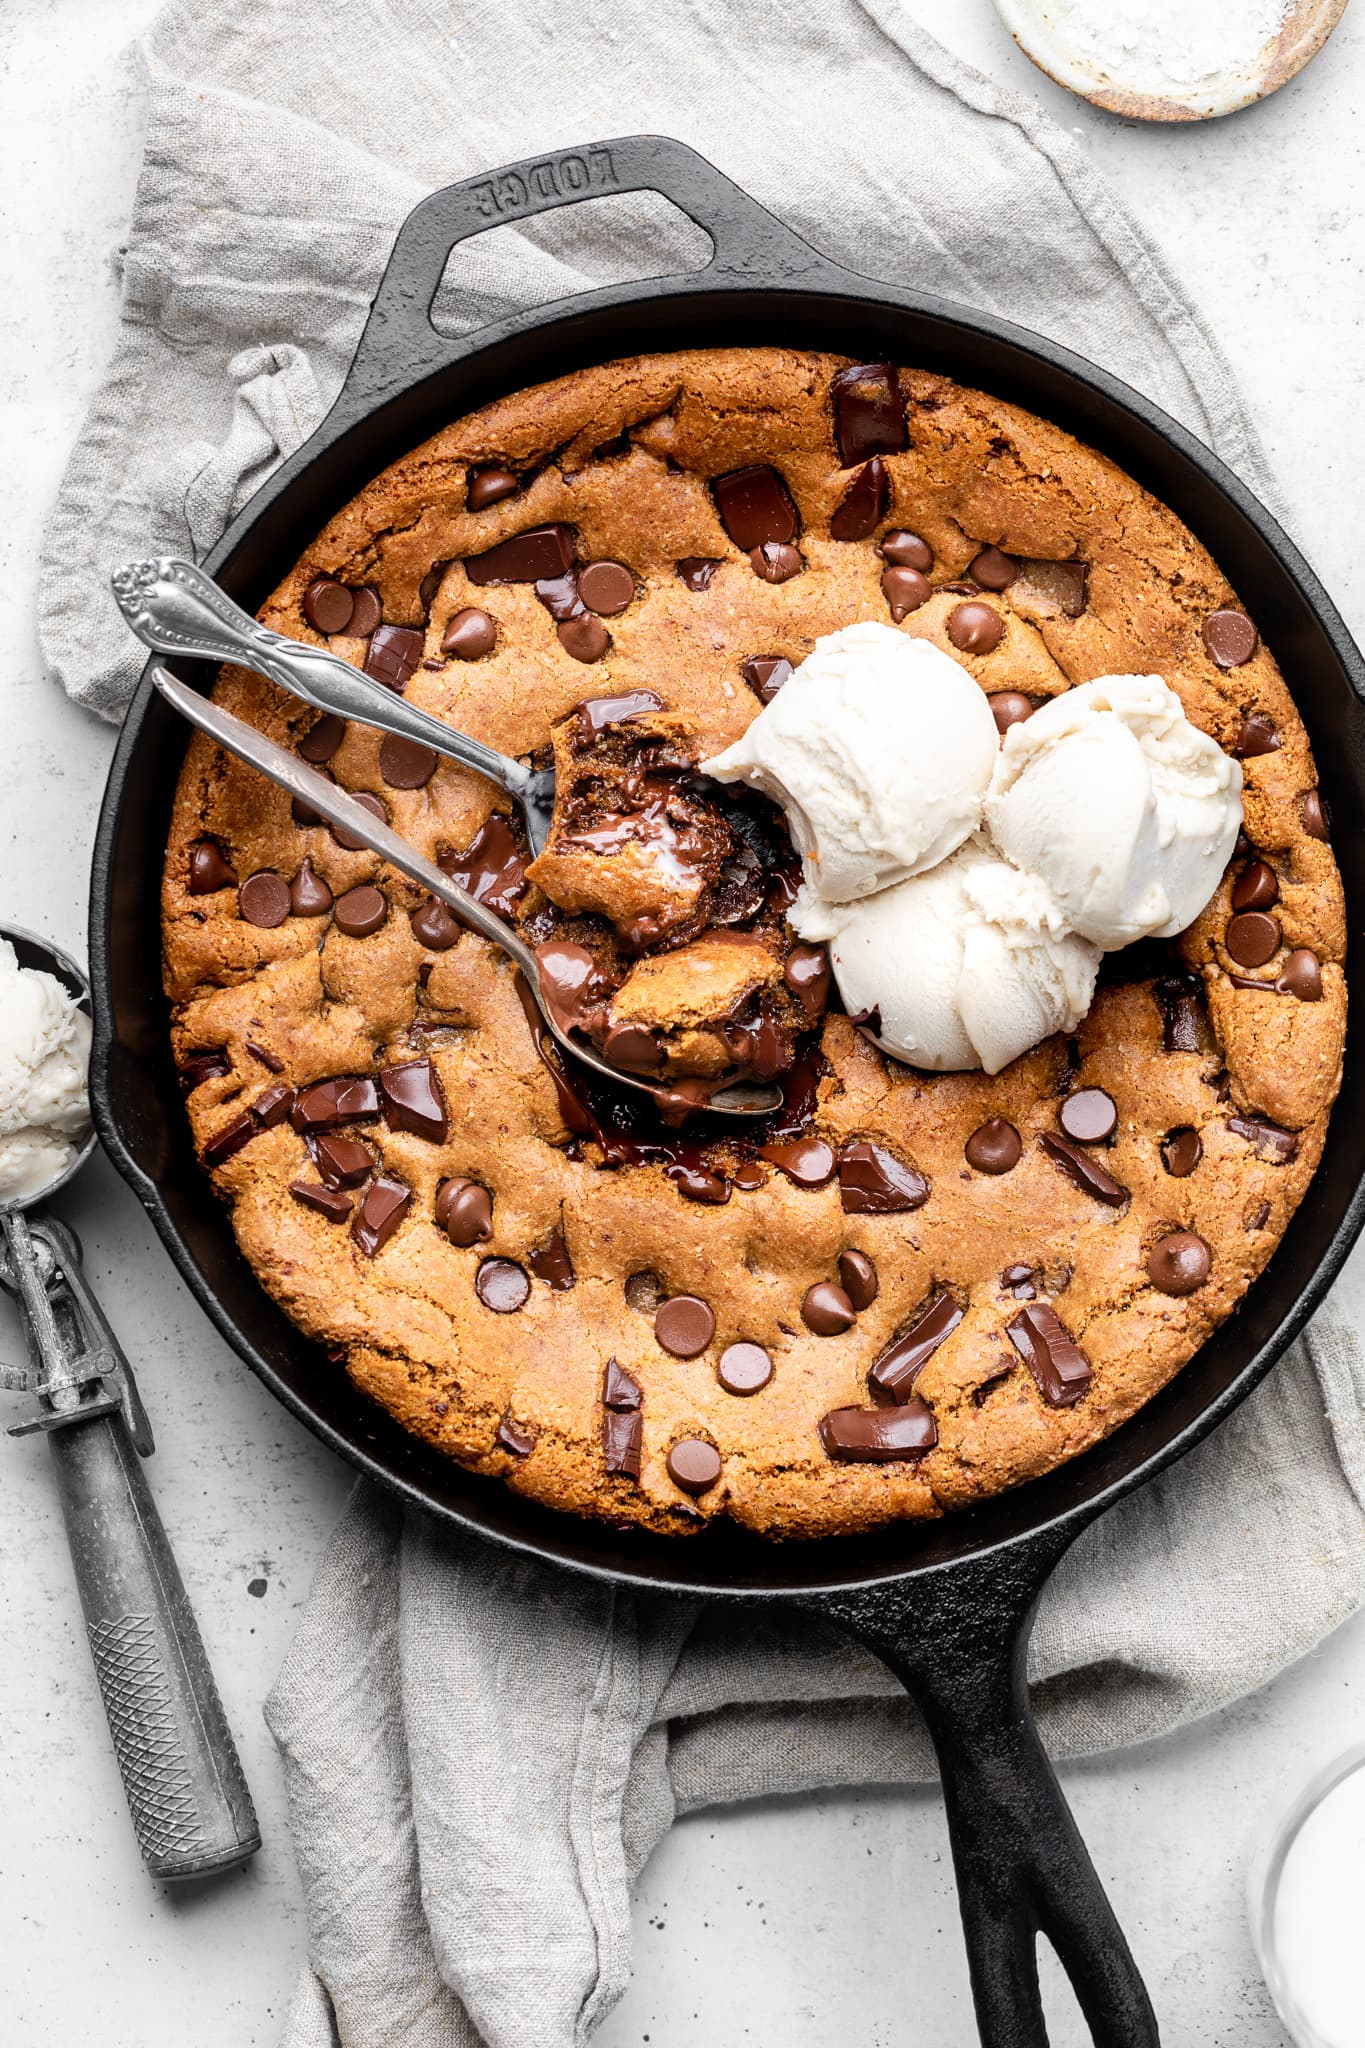 https://allthehealthythings.com/wp-content/uploads/2021/09/chocolate-chip-cookie-skillet-6.jpg